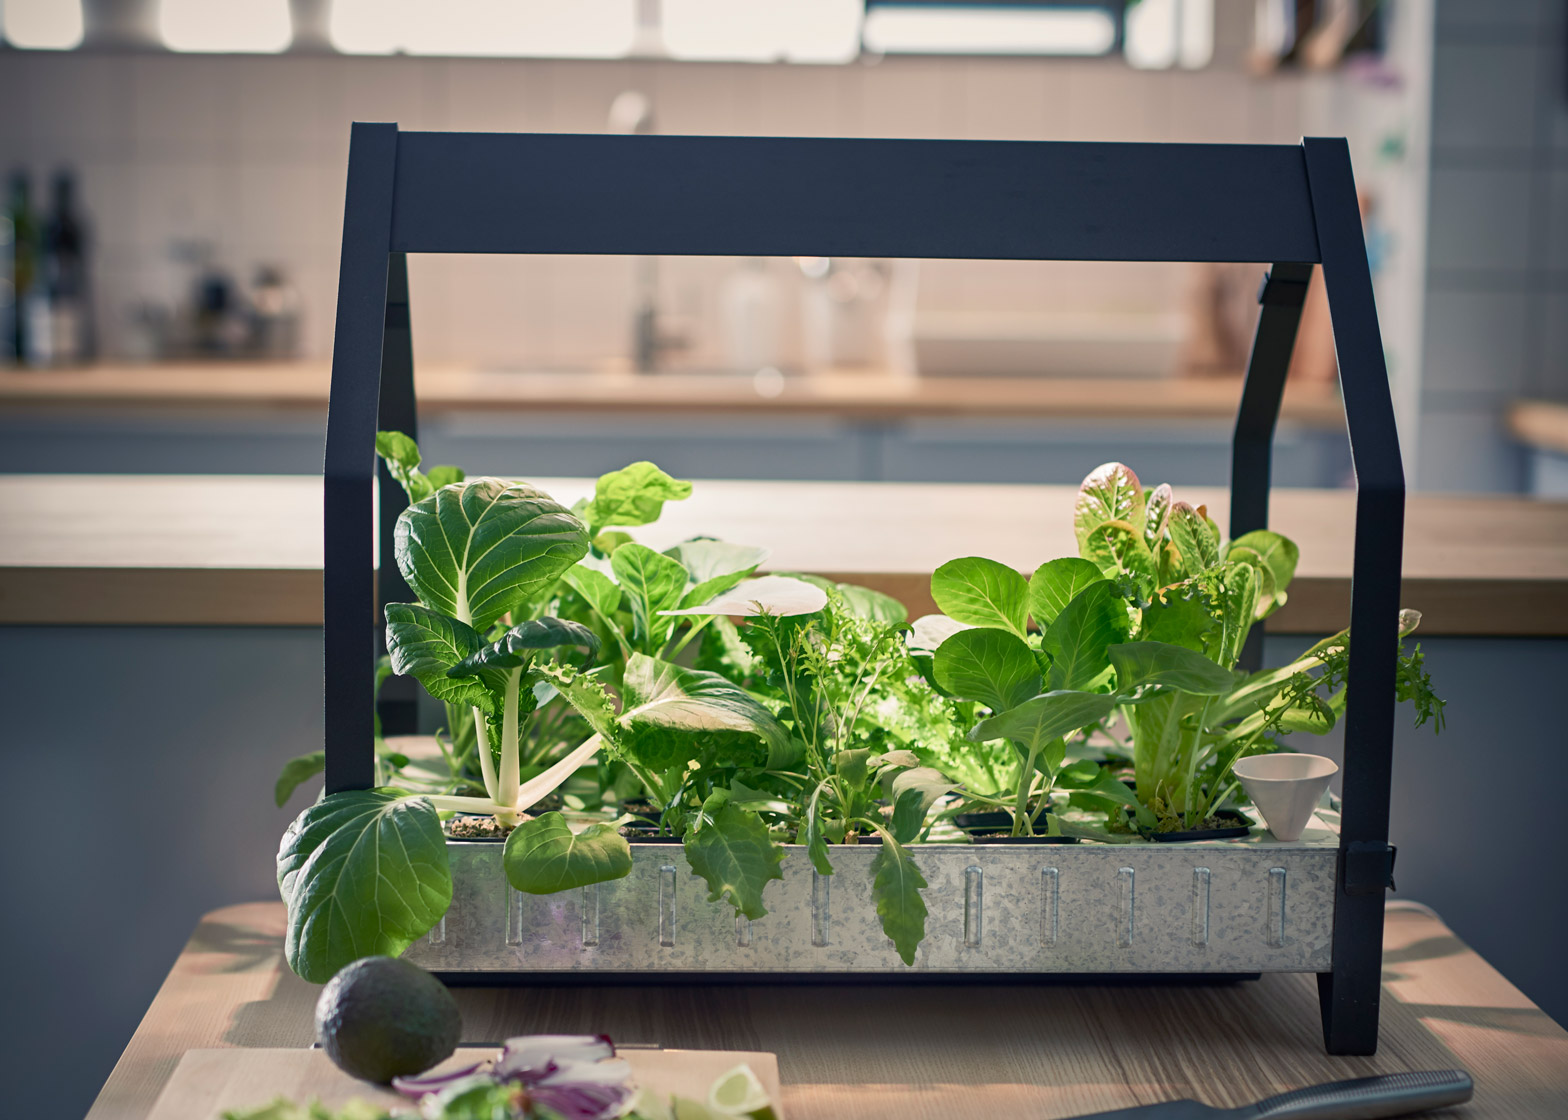 Ikea’s Hydroponic System Allows You To Grow Vegetables